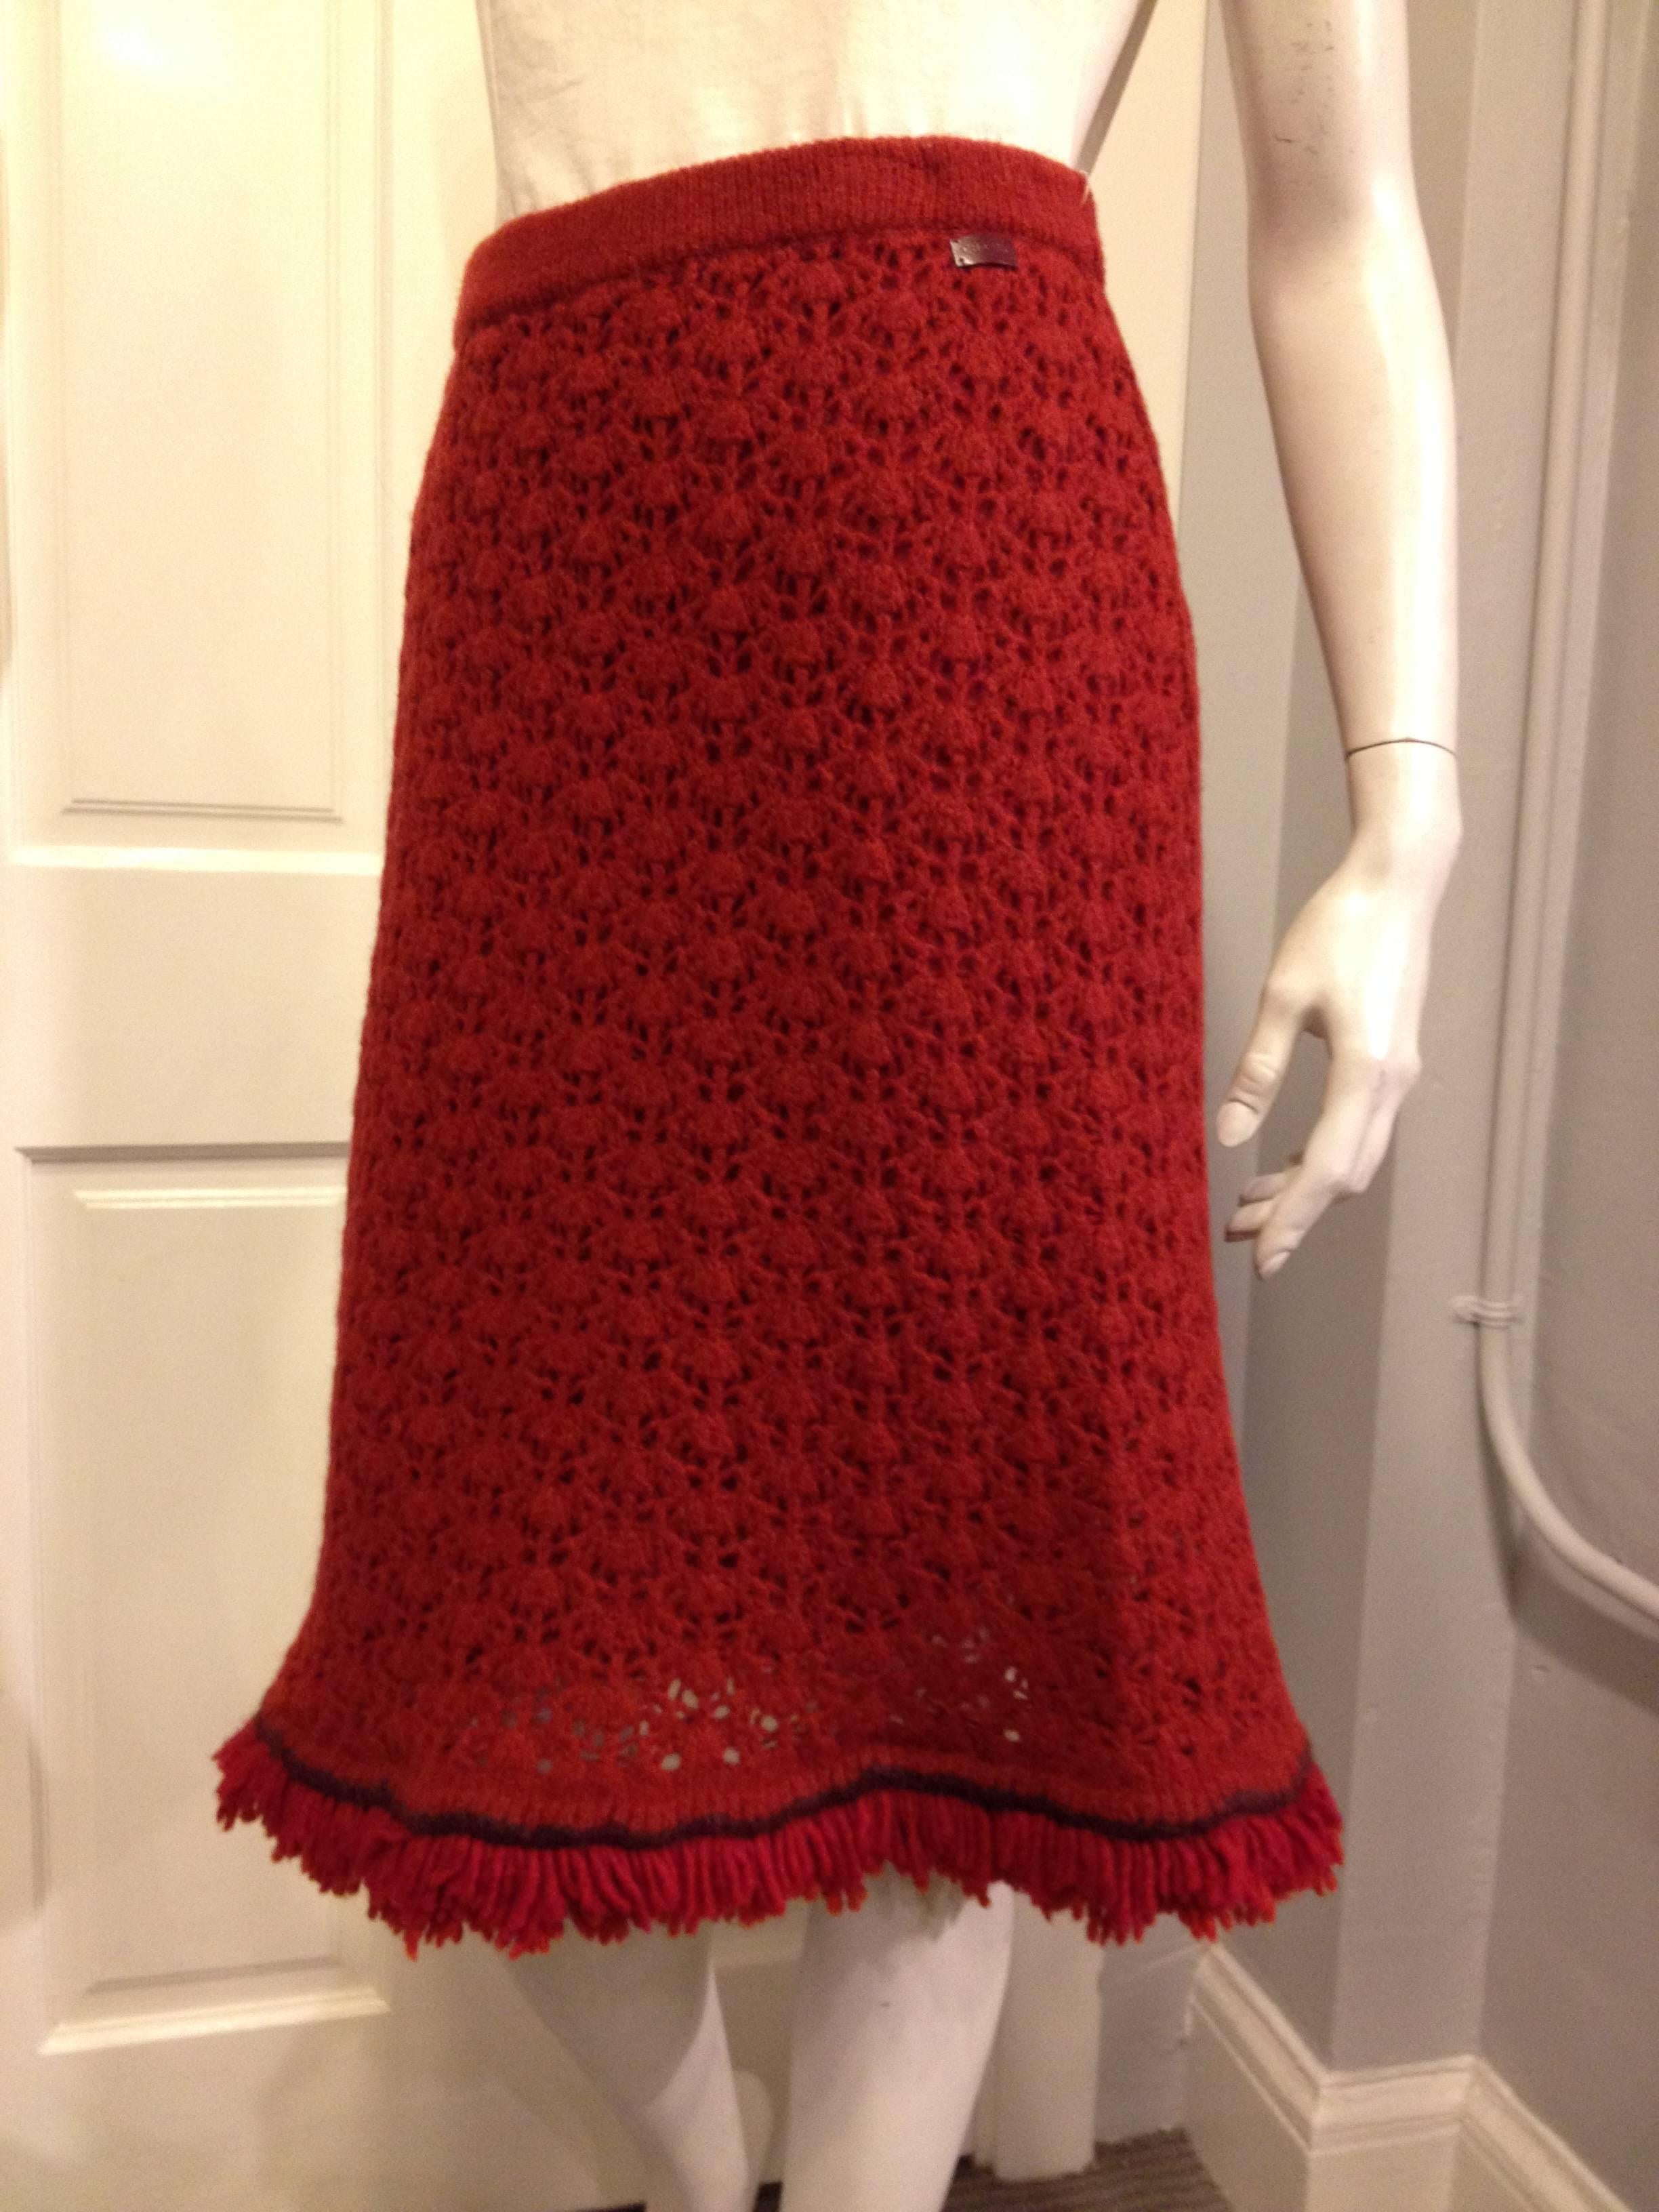 This skirt has the warmth and appeal of something created just for you - it's gorgeously crafted, just like a handmade knit, but all together feels very Chanel when worn. The deep autumnal rusty red color feels so perfect on the thick, wooly strands